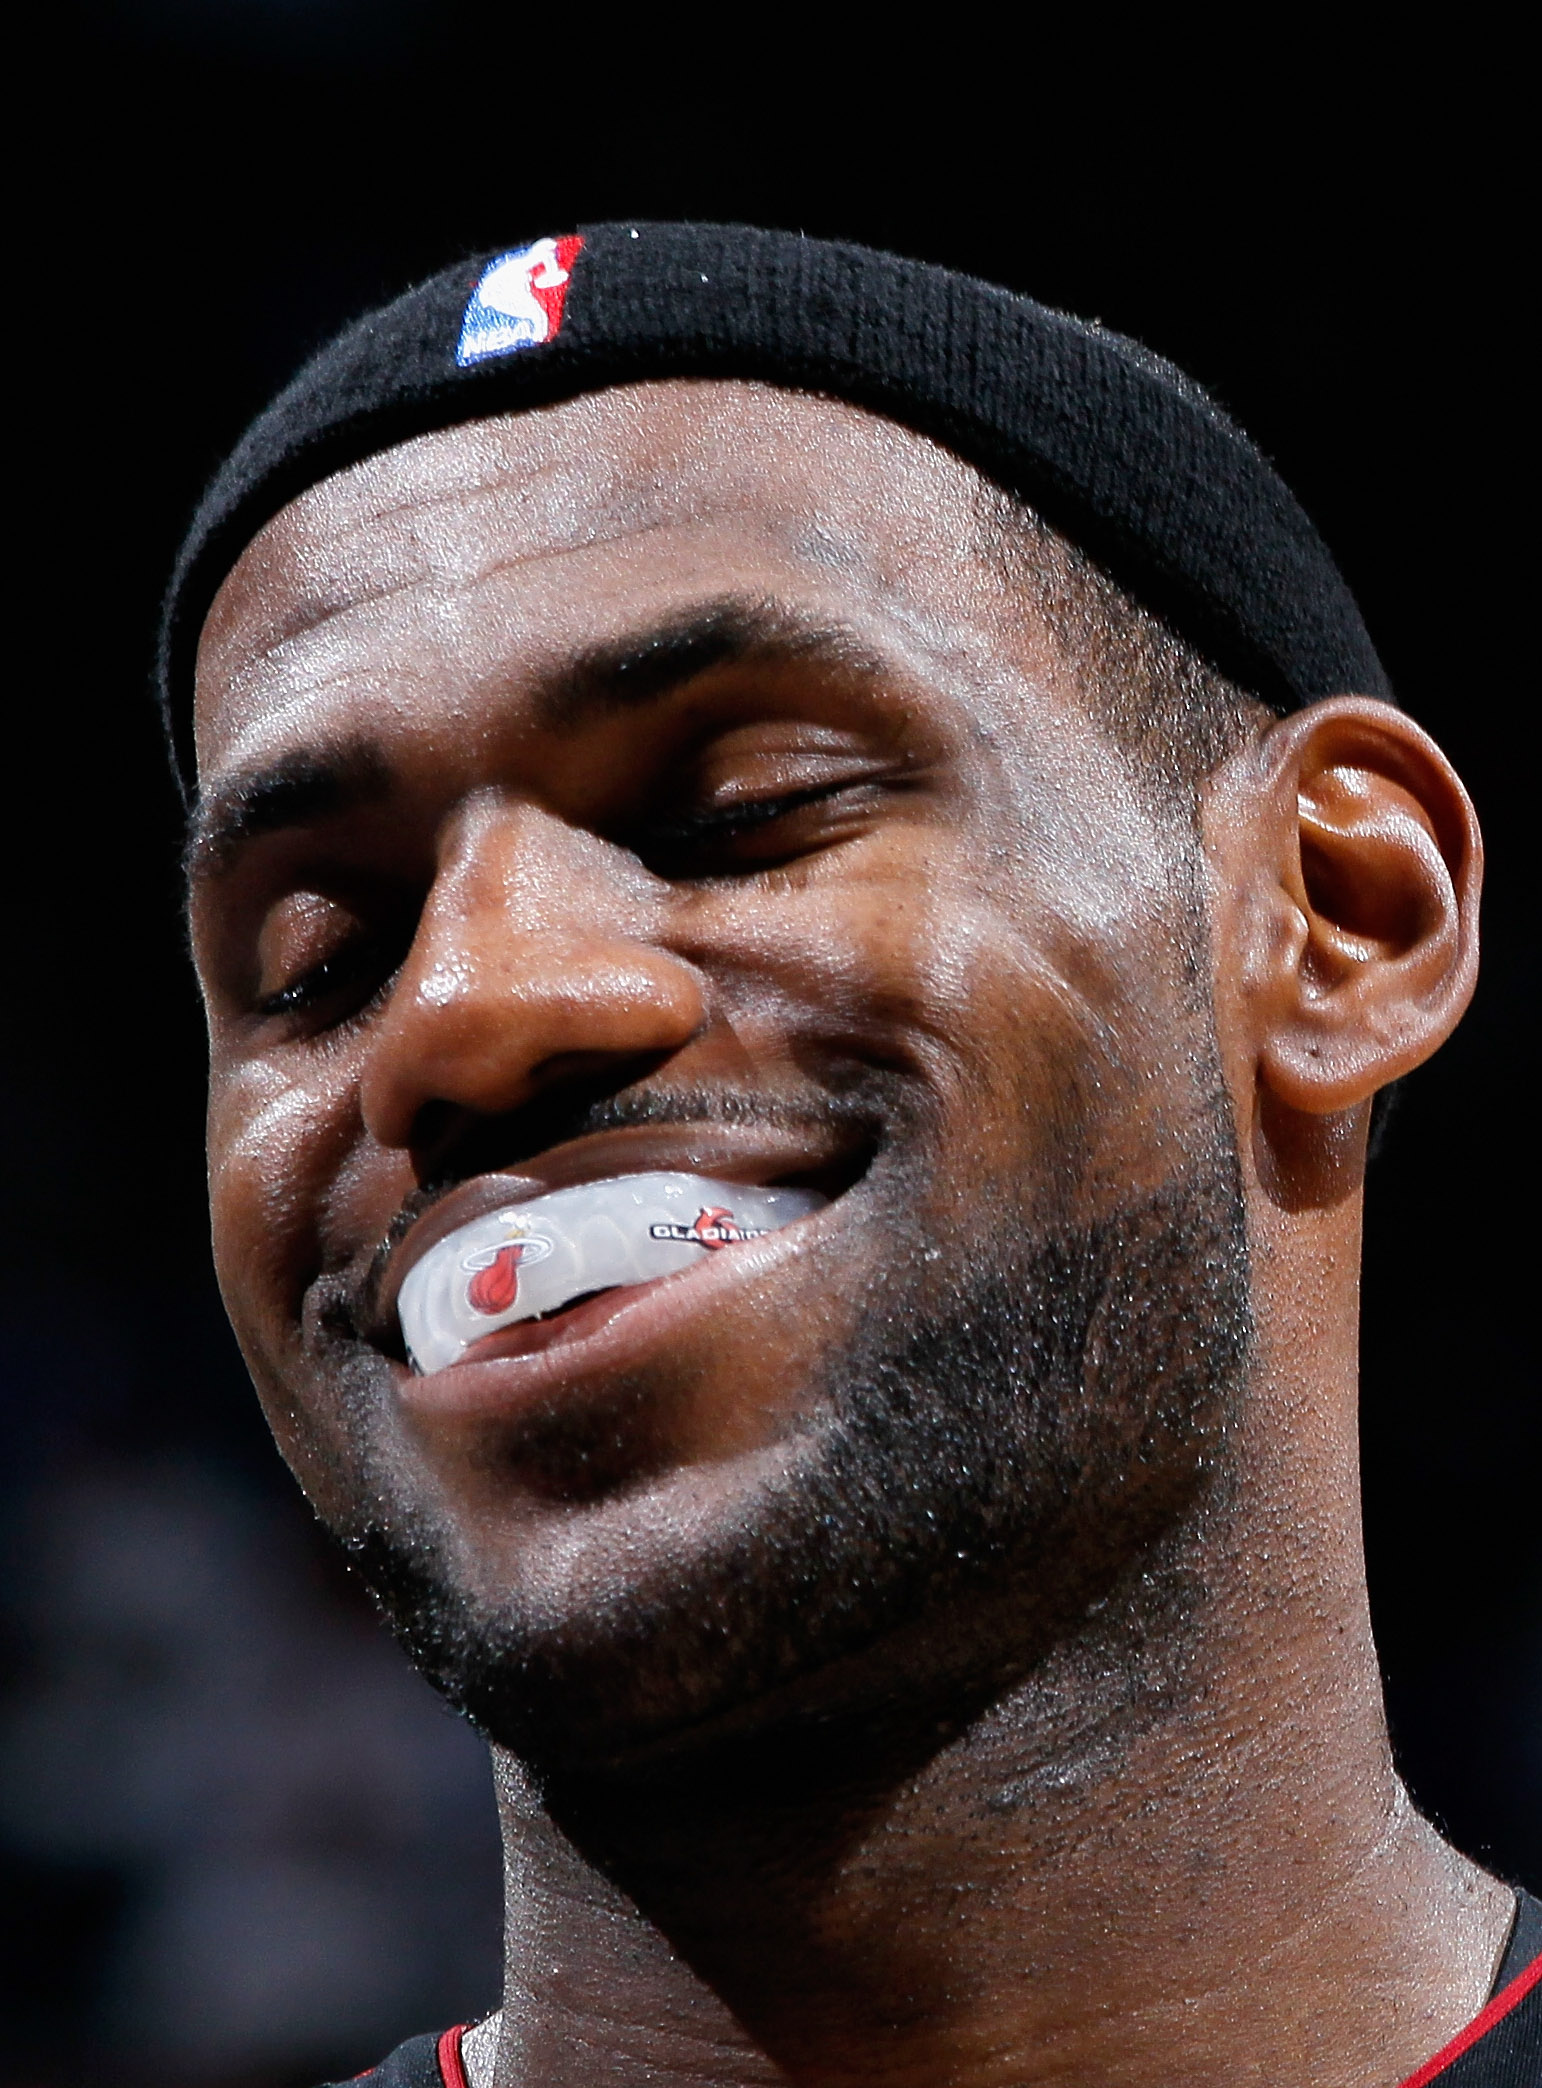 NBA analyst says LeBron James winning 5th title would warrant